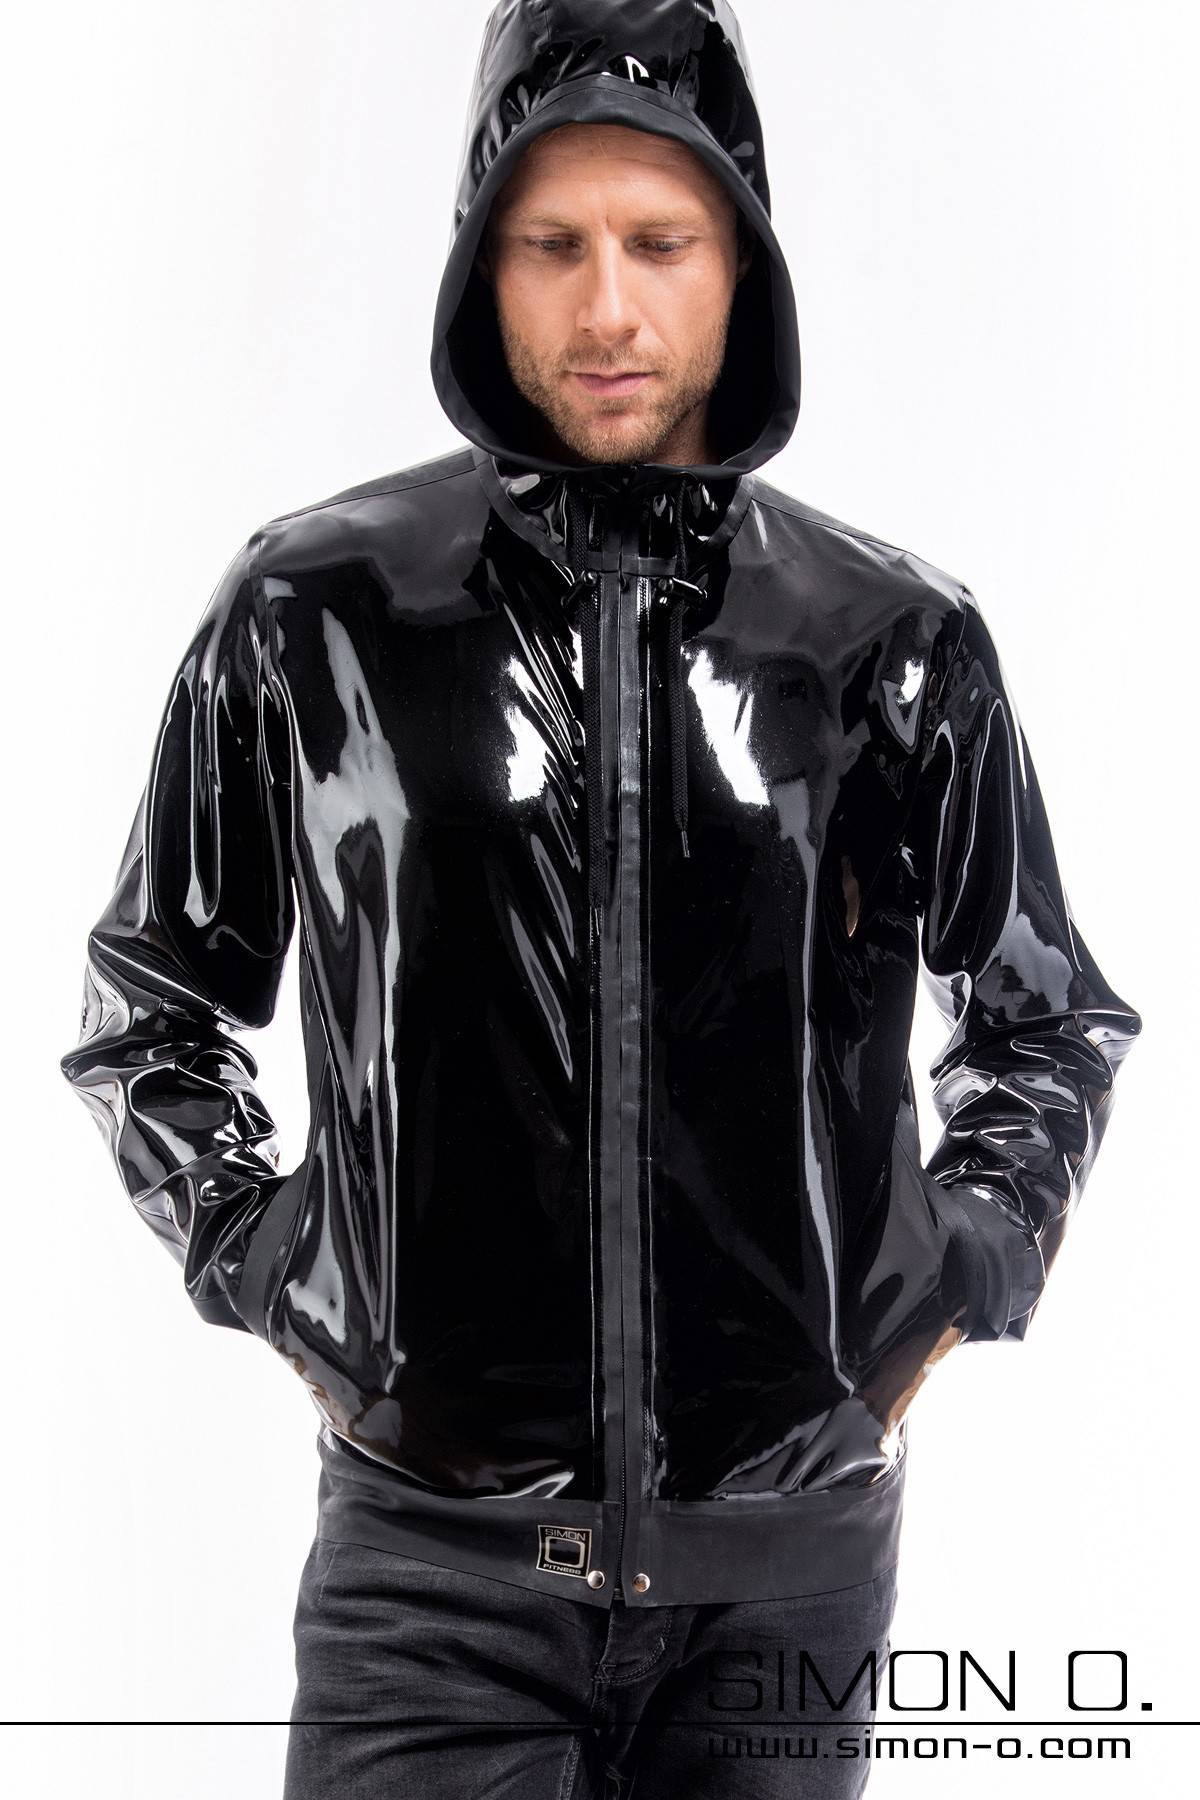 Ellaborately processed hooded latex jacket for men Comes with practical pockets should definitely find a new home in your latex fetish wear wardrobe. If you …